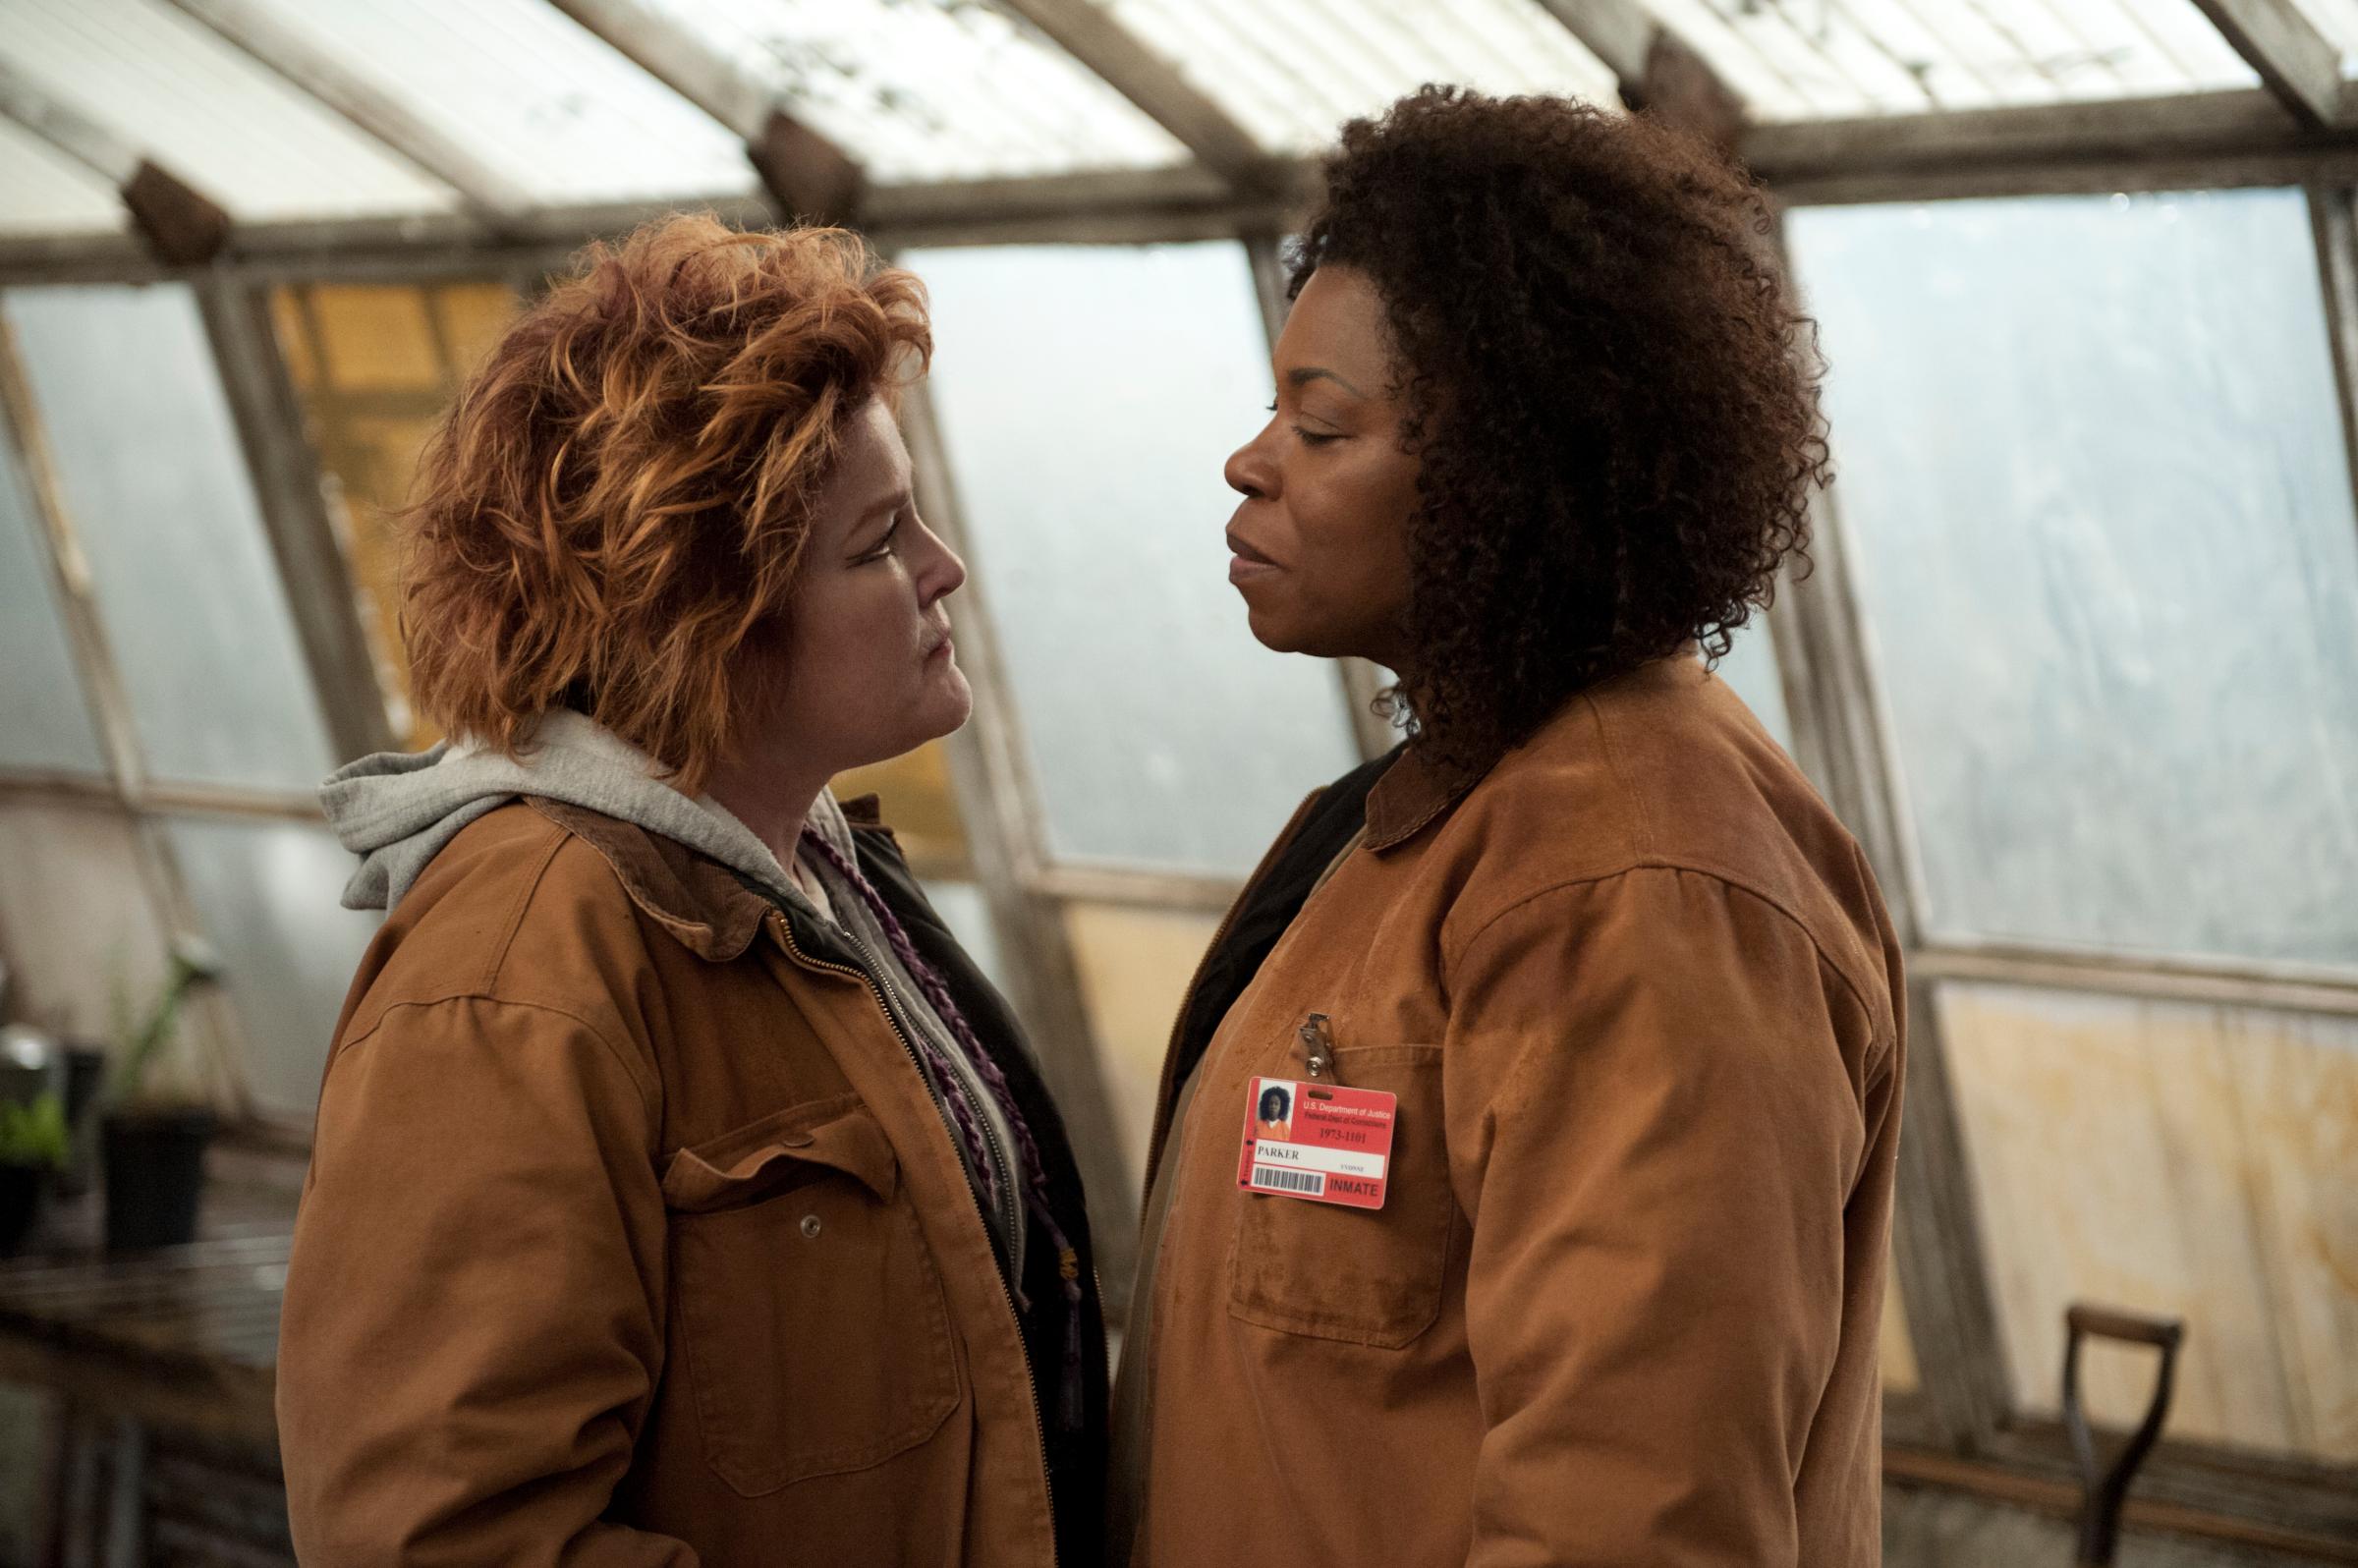 Kate Mulgrew (L) and Lorraine Toussaint (R) in a scene from NetflixÕs ÒOrange is the New BlackÓ Season 2. Photo credit: JoJo Whilden for Netflix.